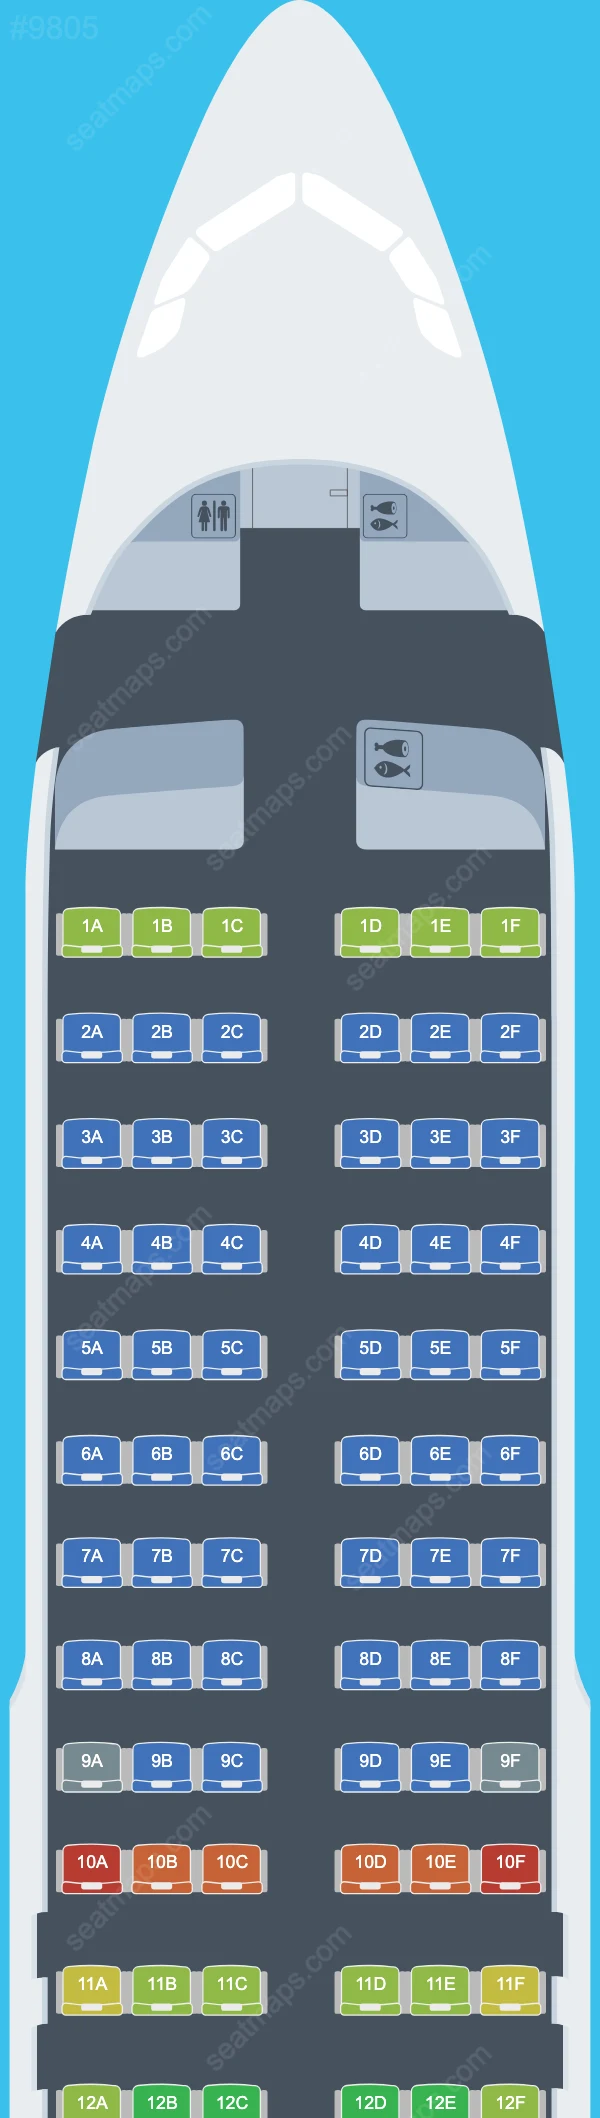 Olympic Air Airbus A320-200 seatmap preview